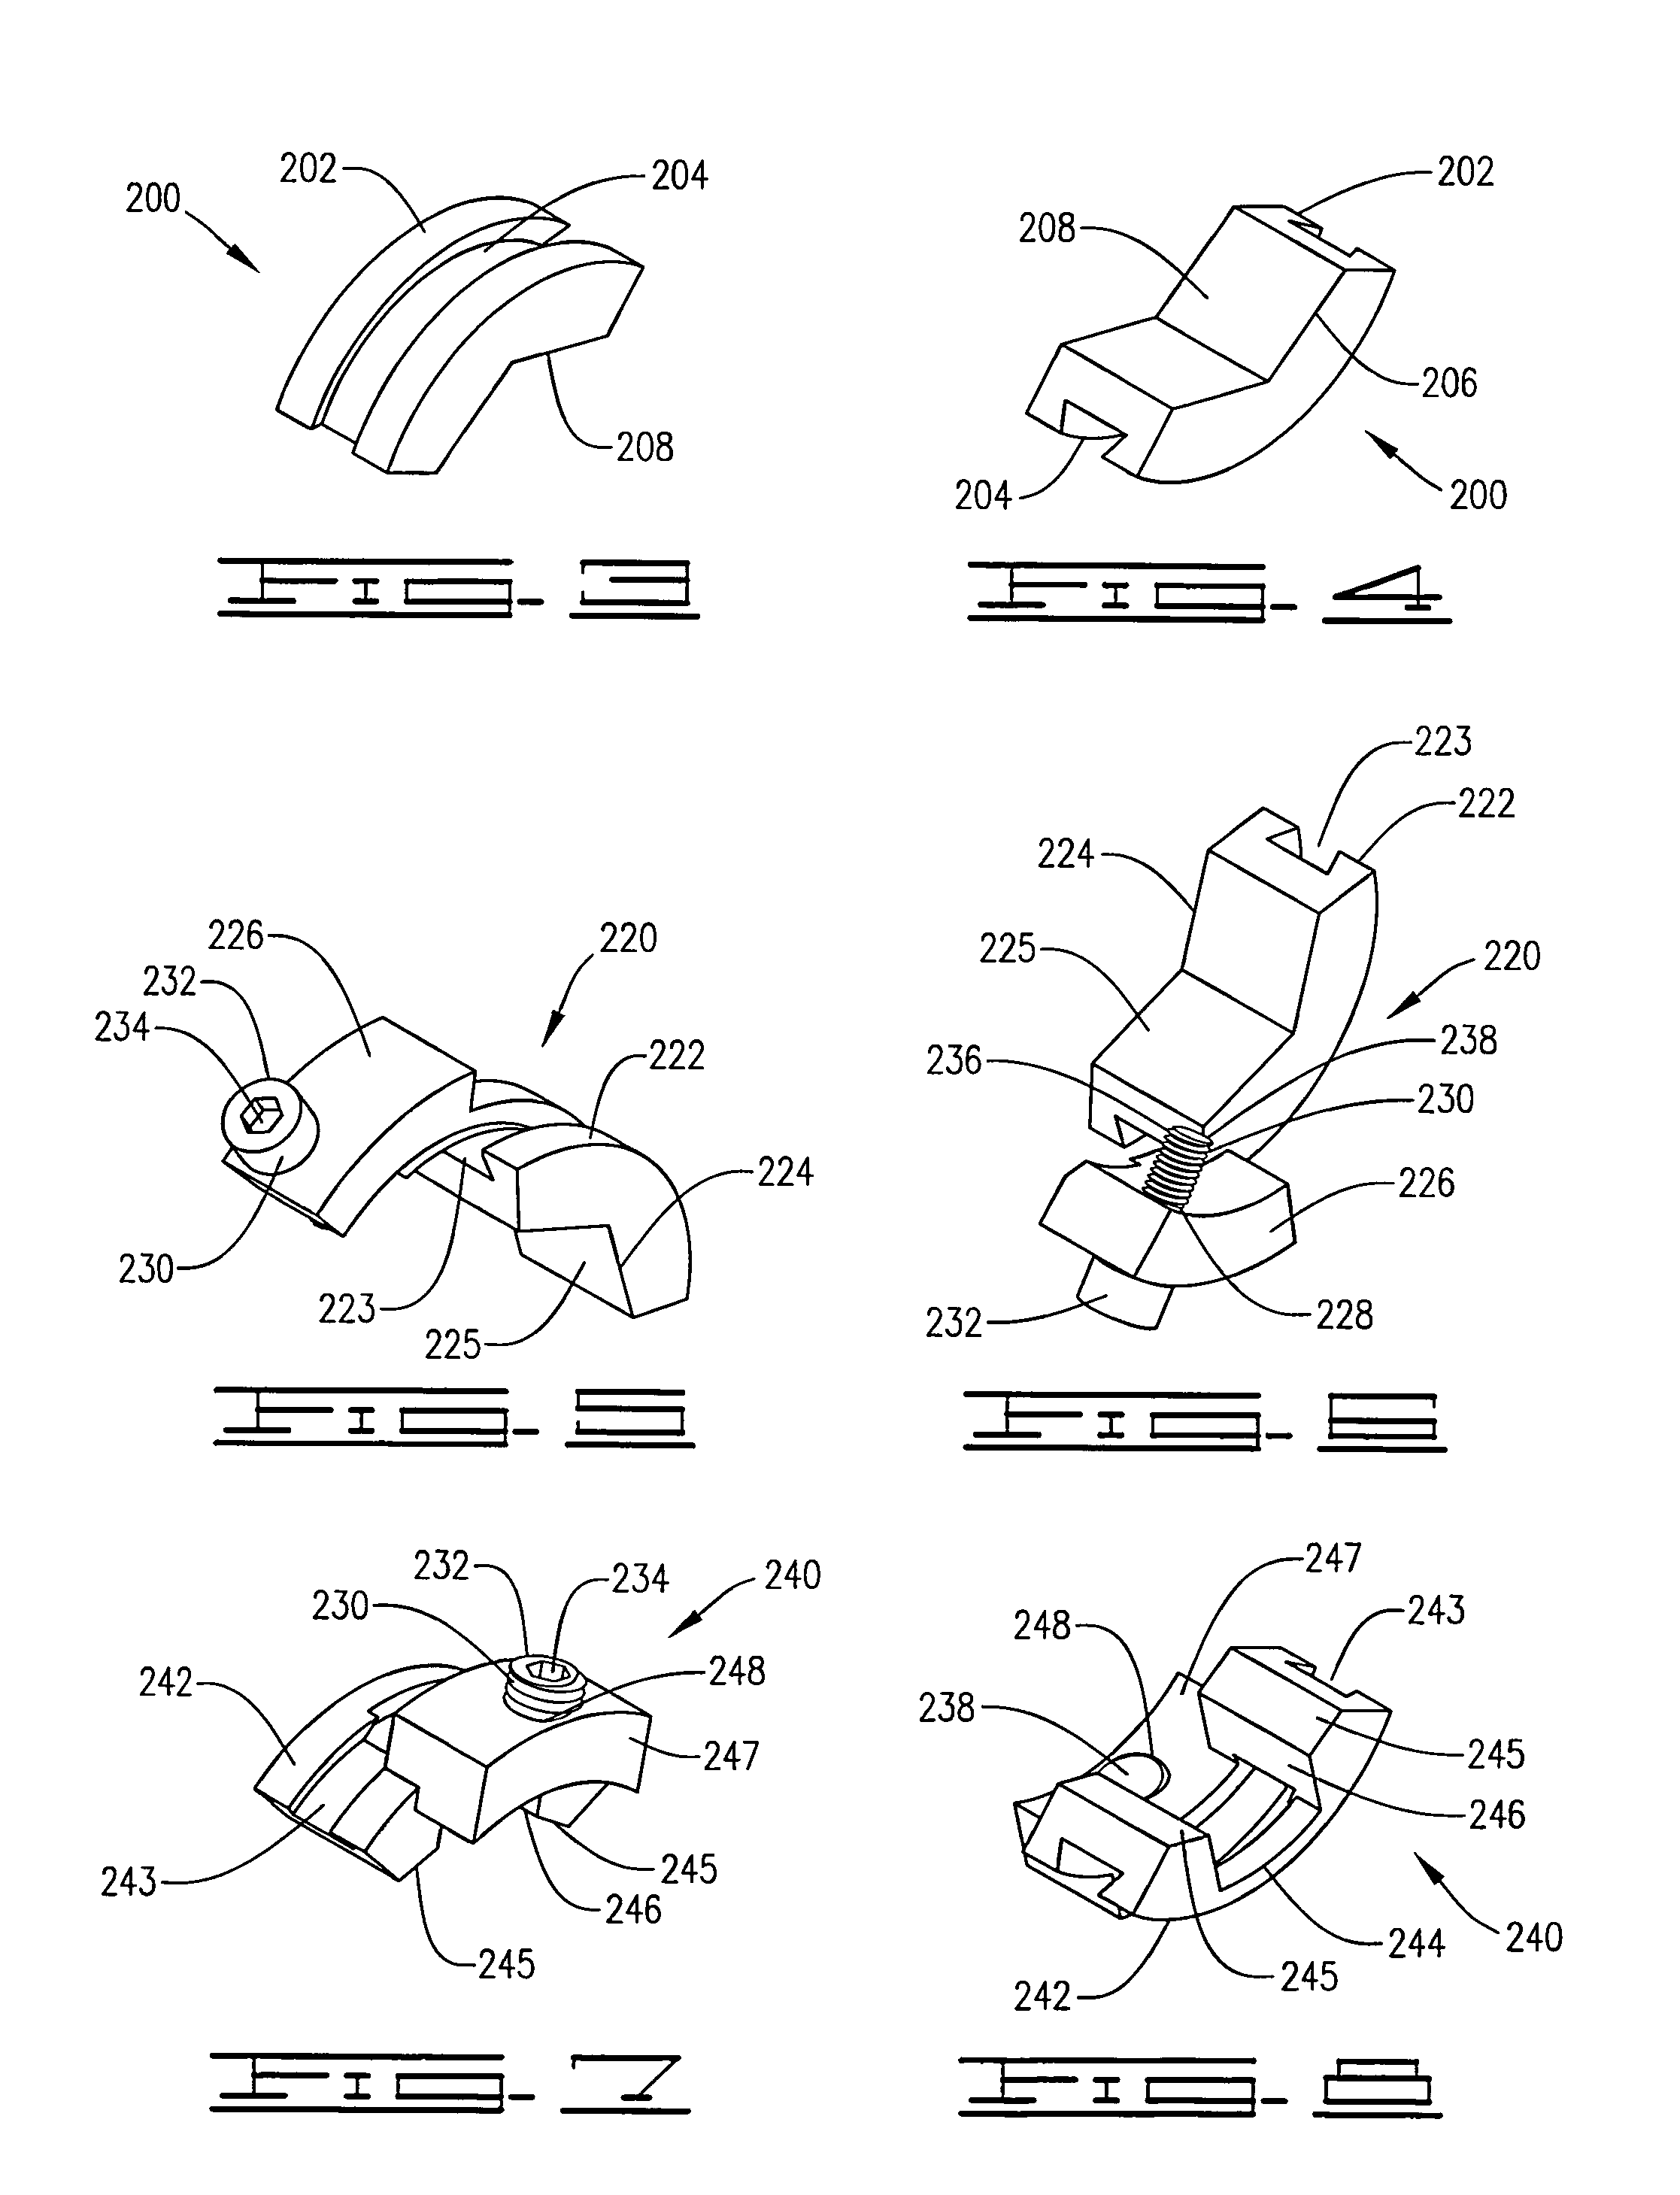 Bone reduction and plate clamp assembly